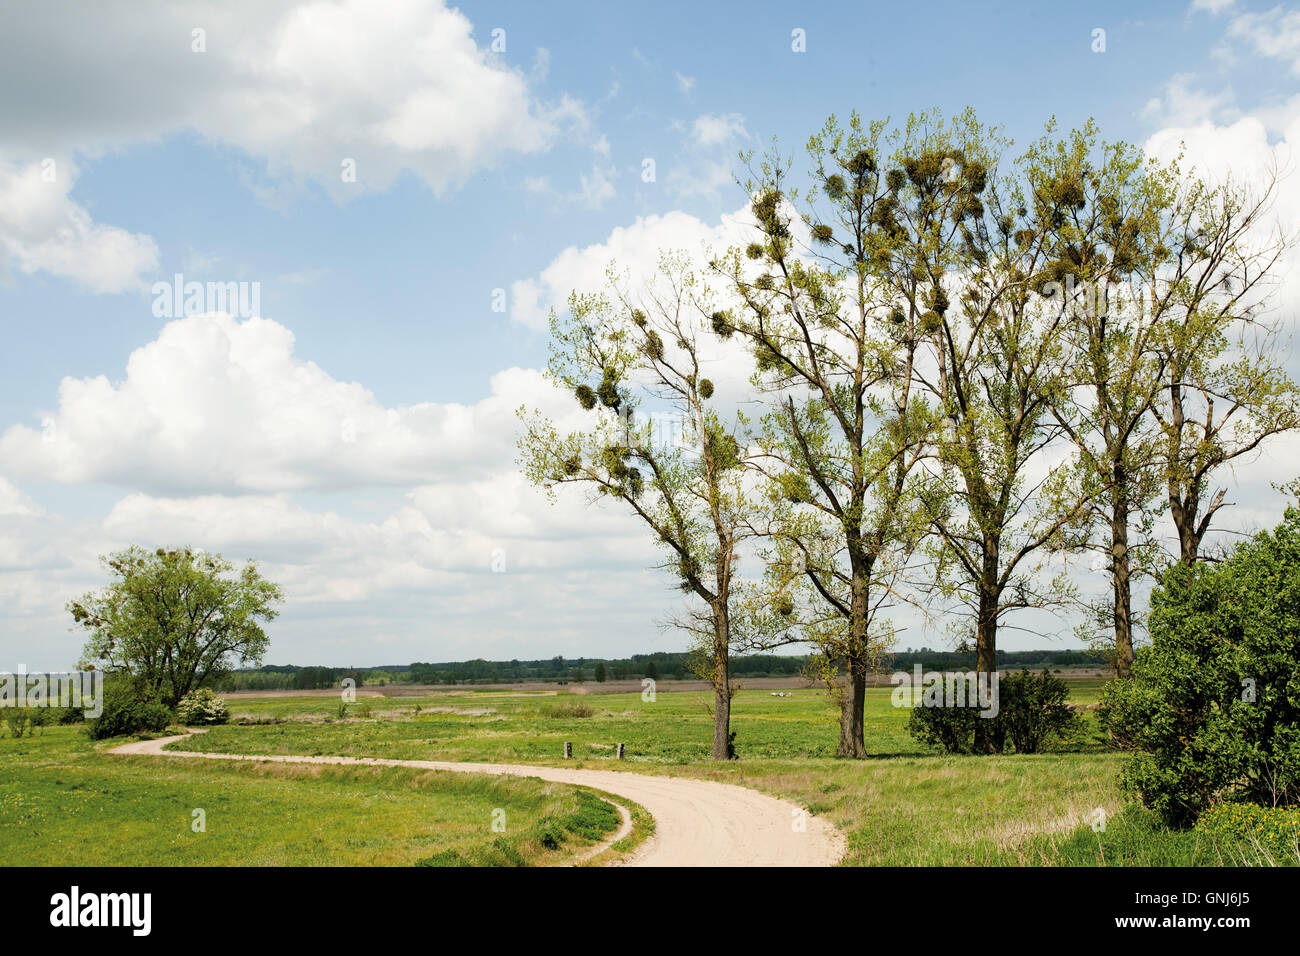 country ground road or rural beautiful landscape Stock Photo